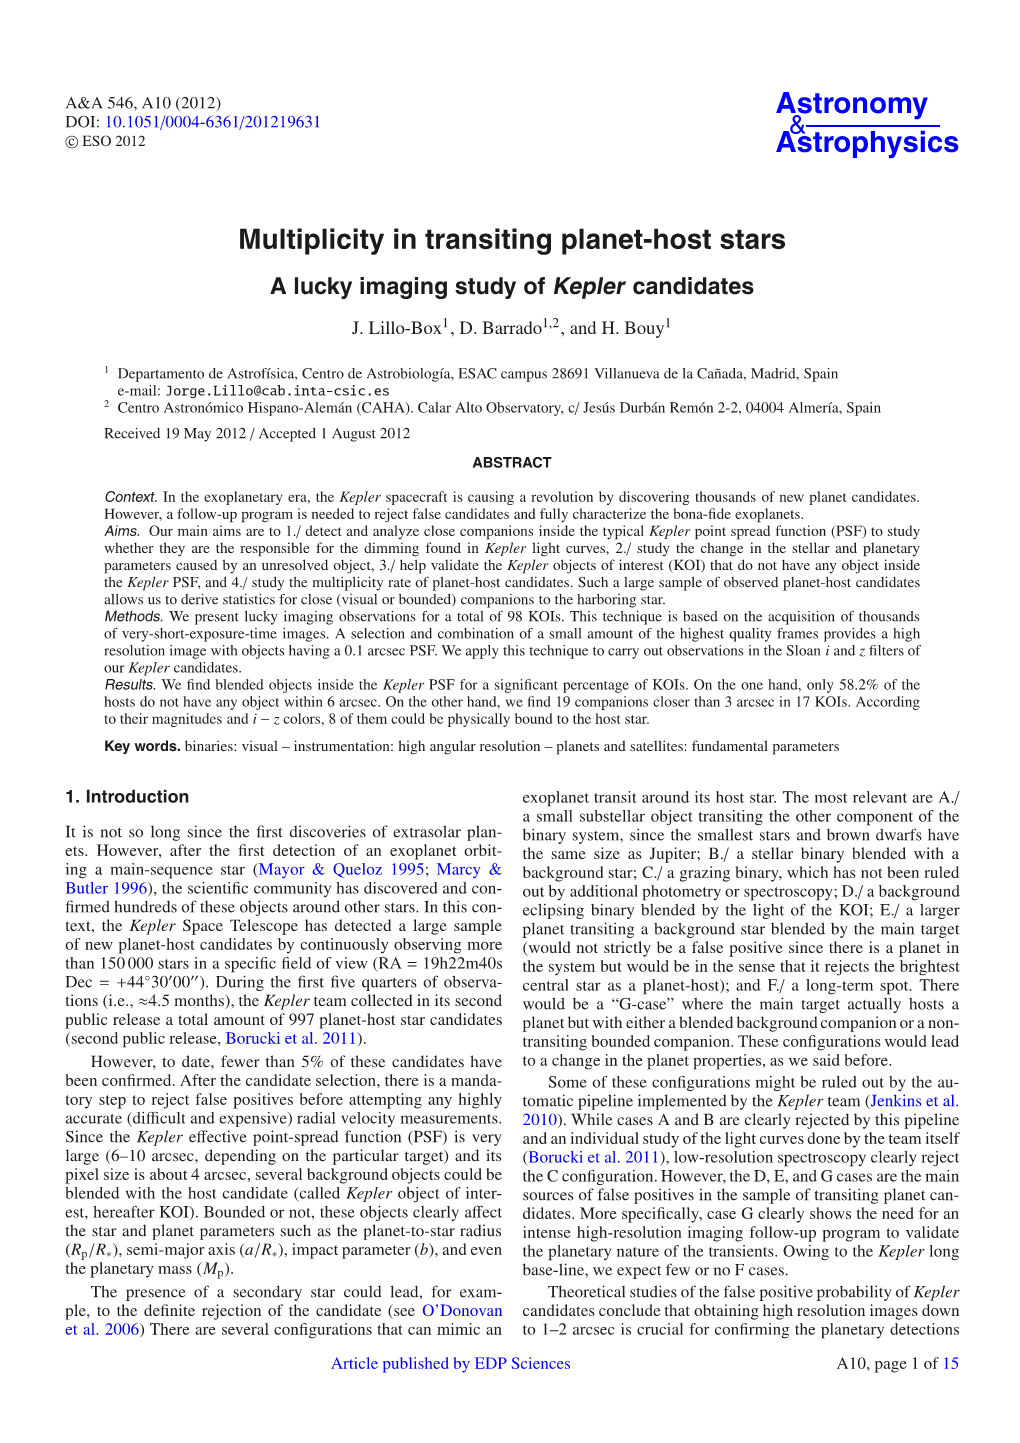 Multiplicity in Transiting Planet-Host Stars a Lucky Imaging Study of Kepler Candidates